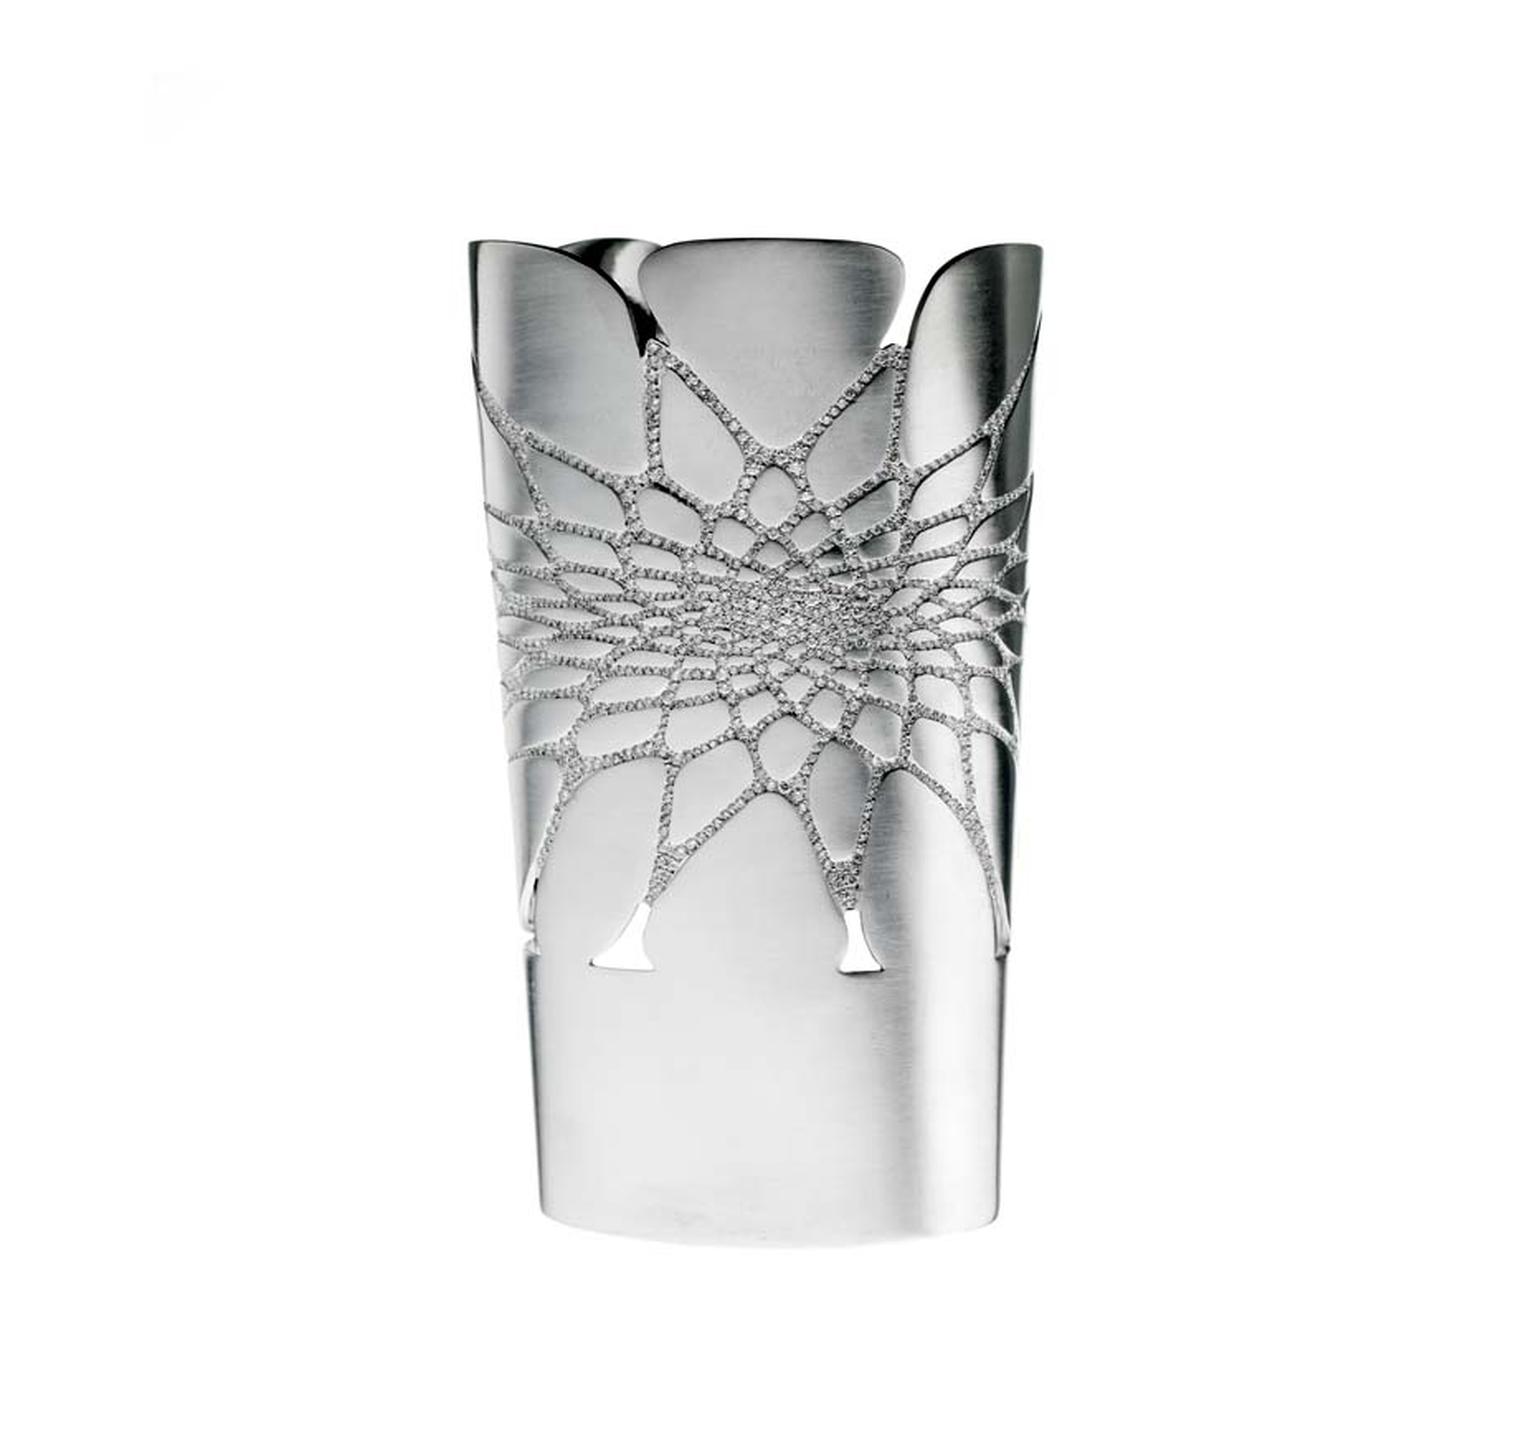 Architect Zaha Hadid collaborates with Lebanese jeweller AW Mouzannar on a showstopping white gold cuff